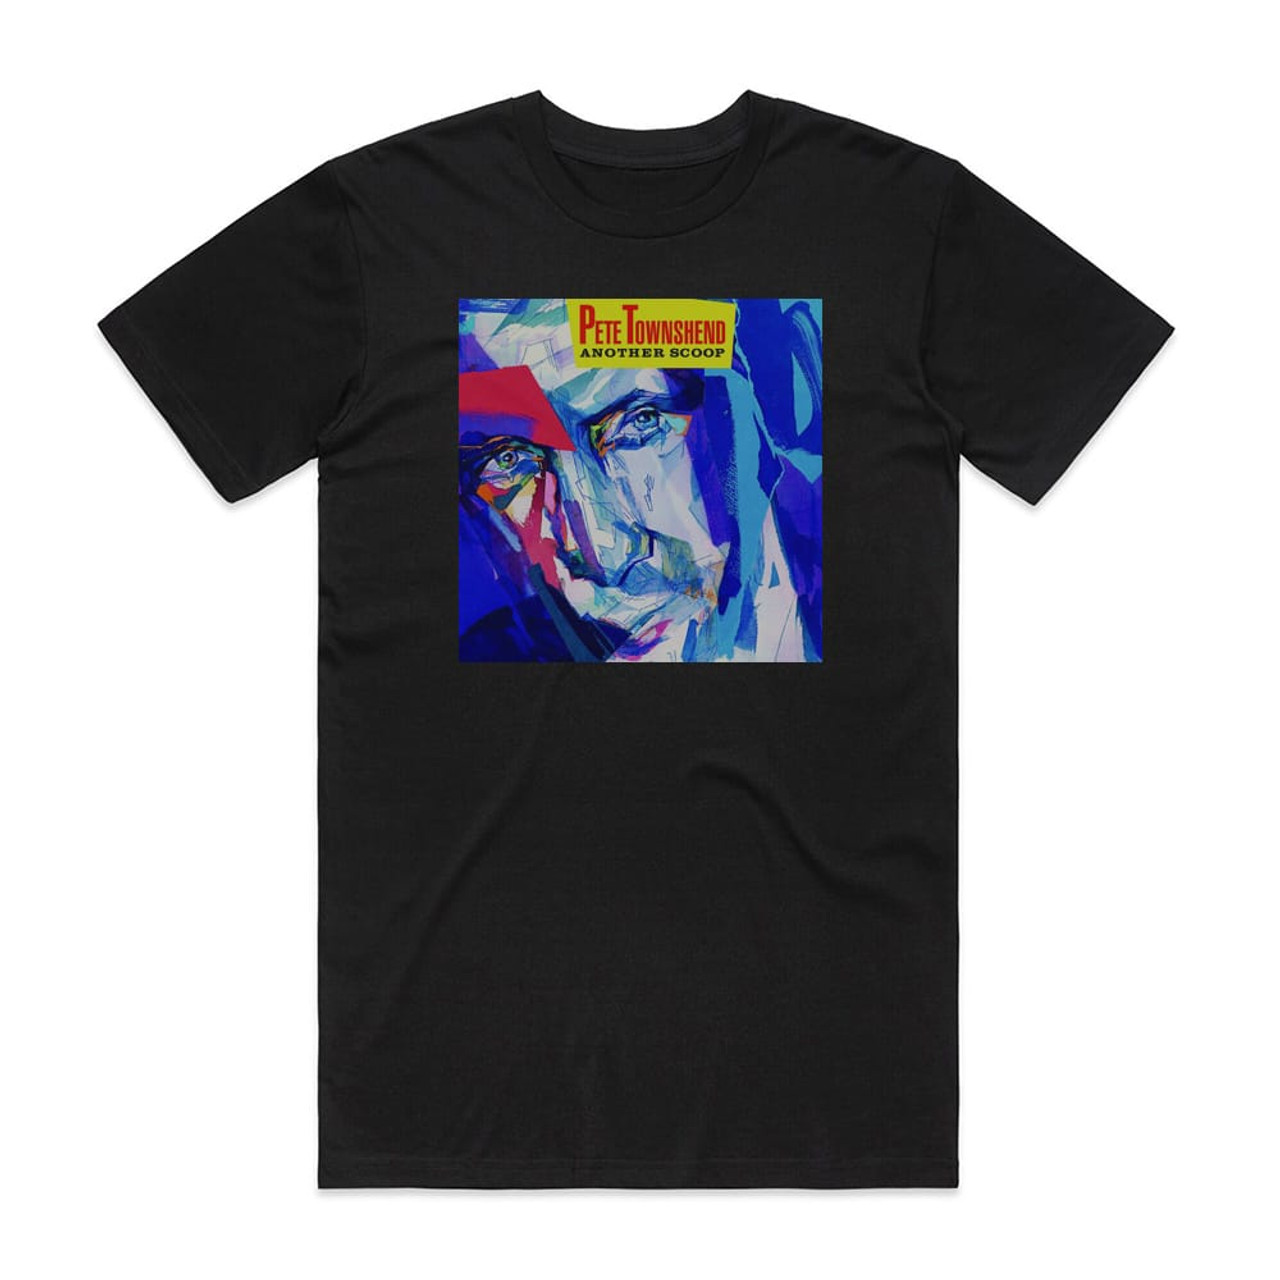 Pete Townshend Another Scoop Album Cover T-Shirt Black